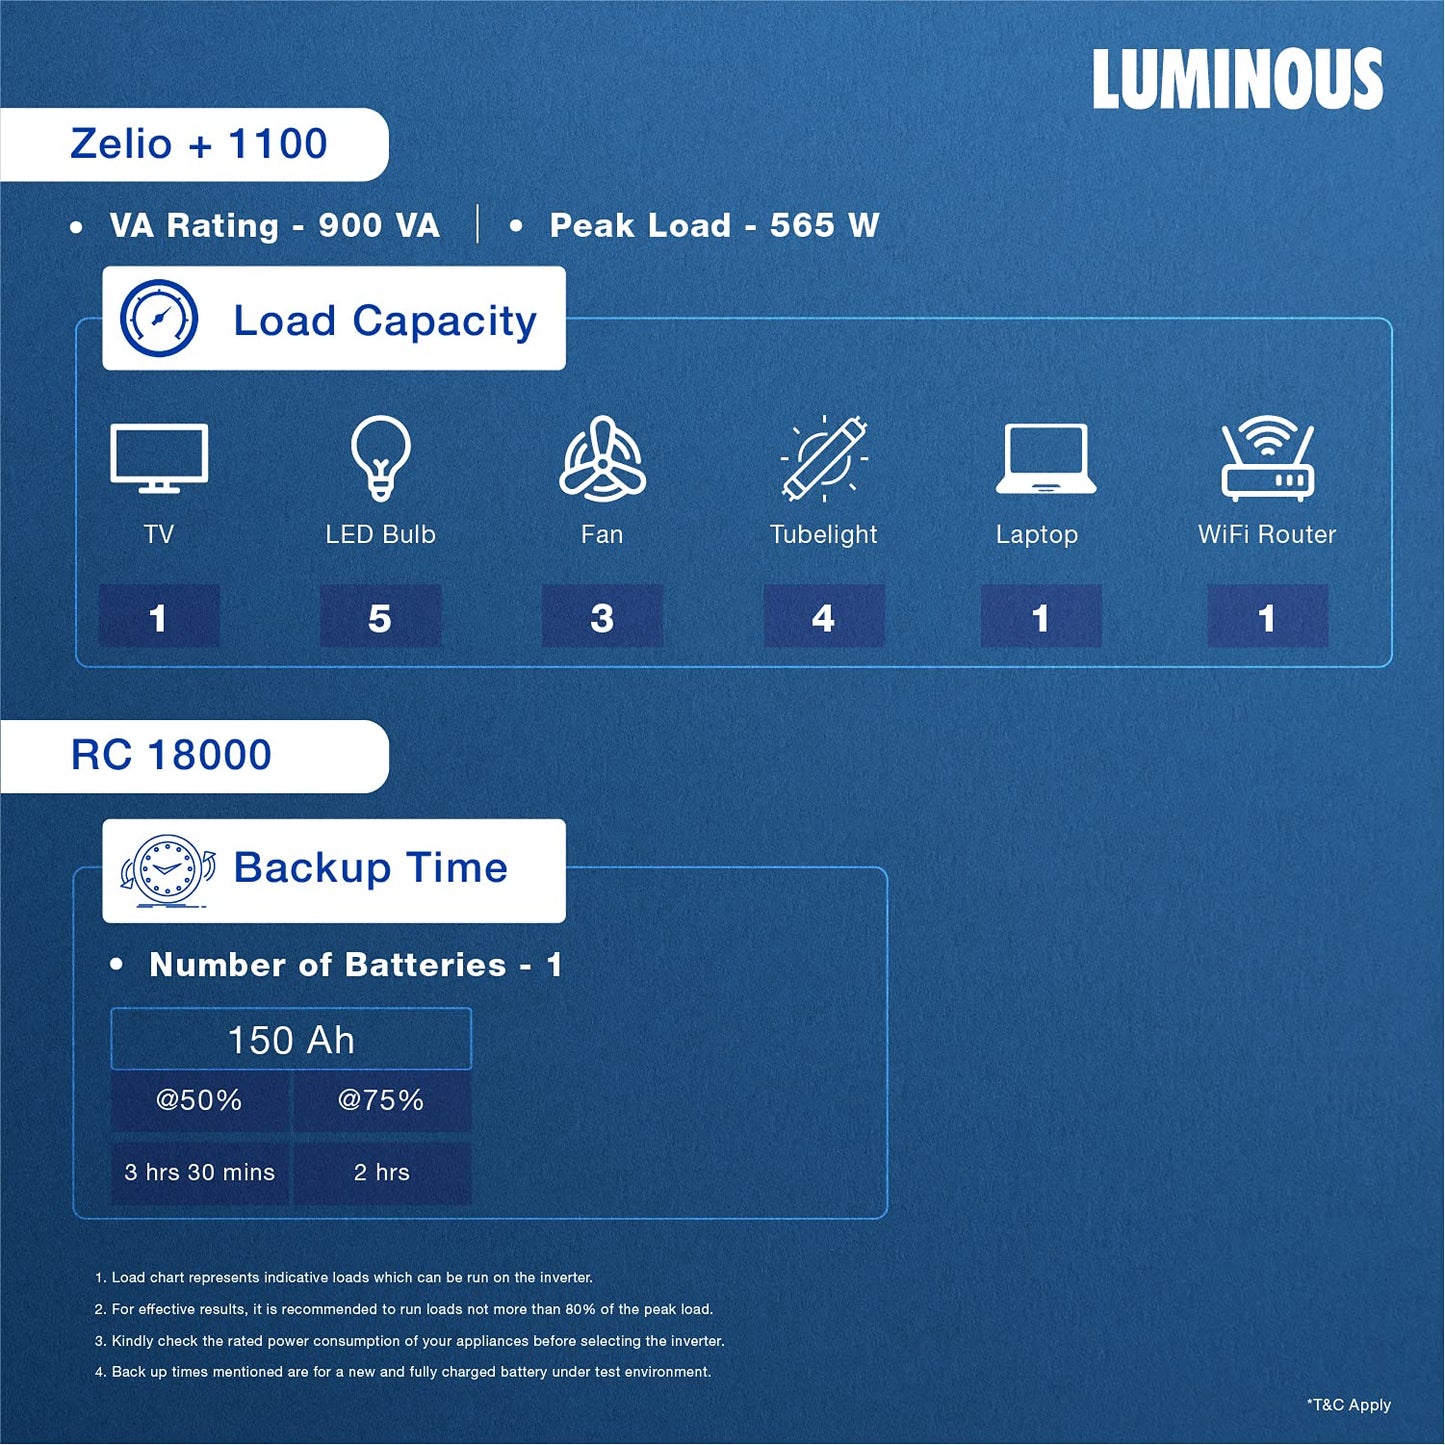 Luminous Zelio+ 1100 Inverter 900VA with RC18000 150Ah Battery and Trolley